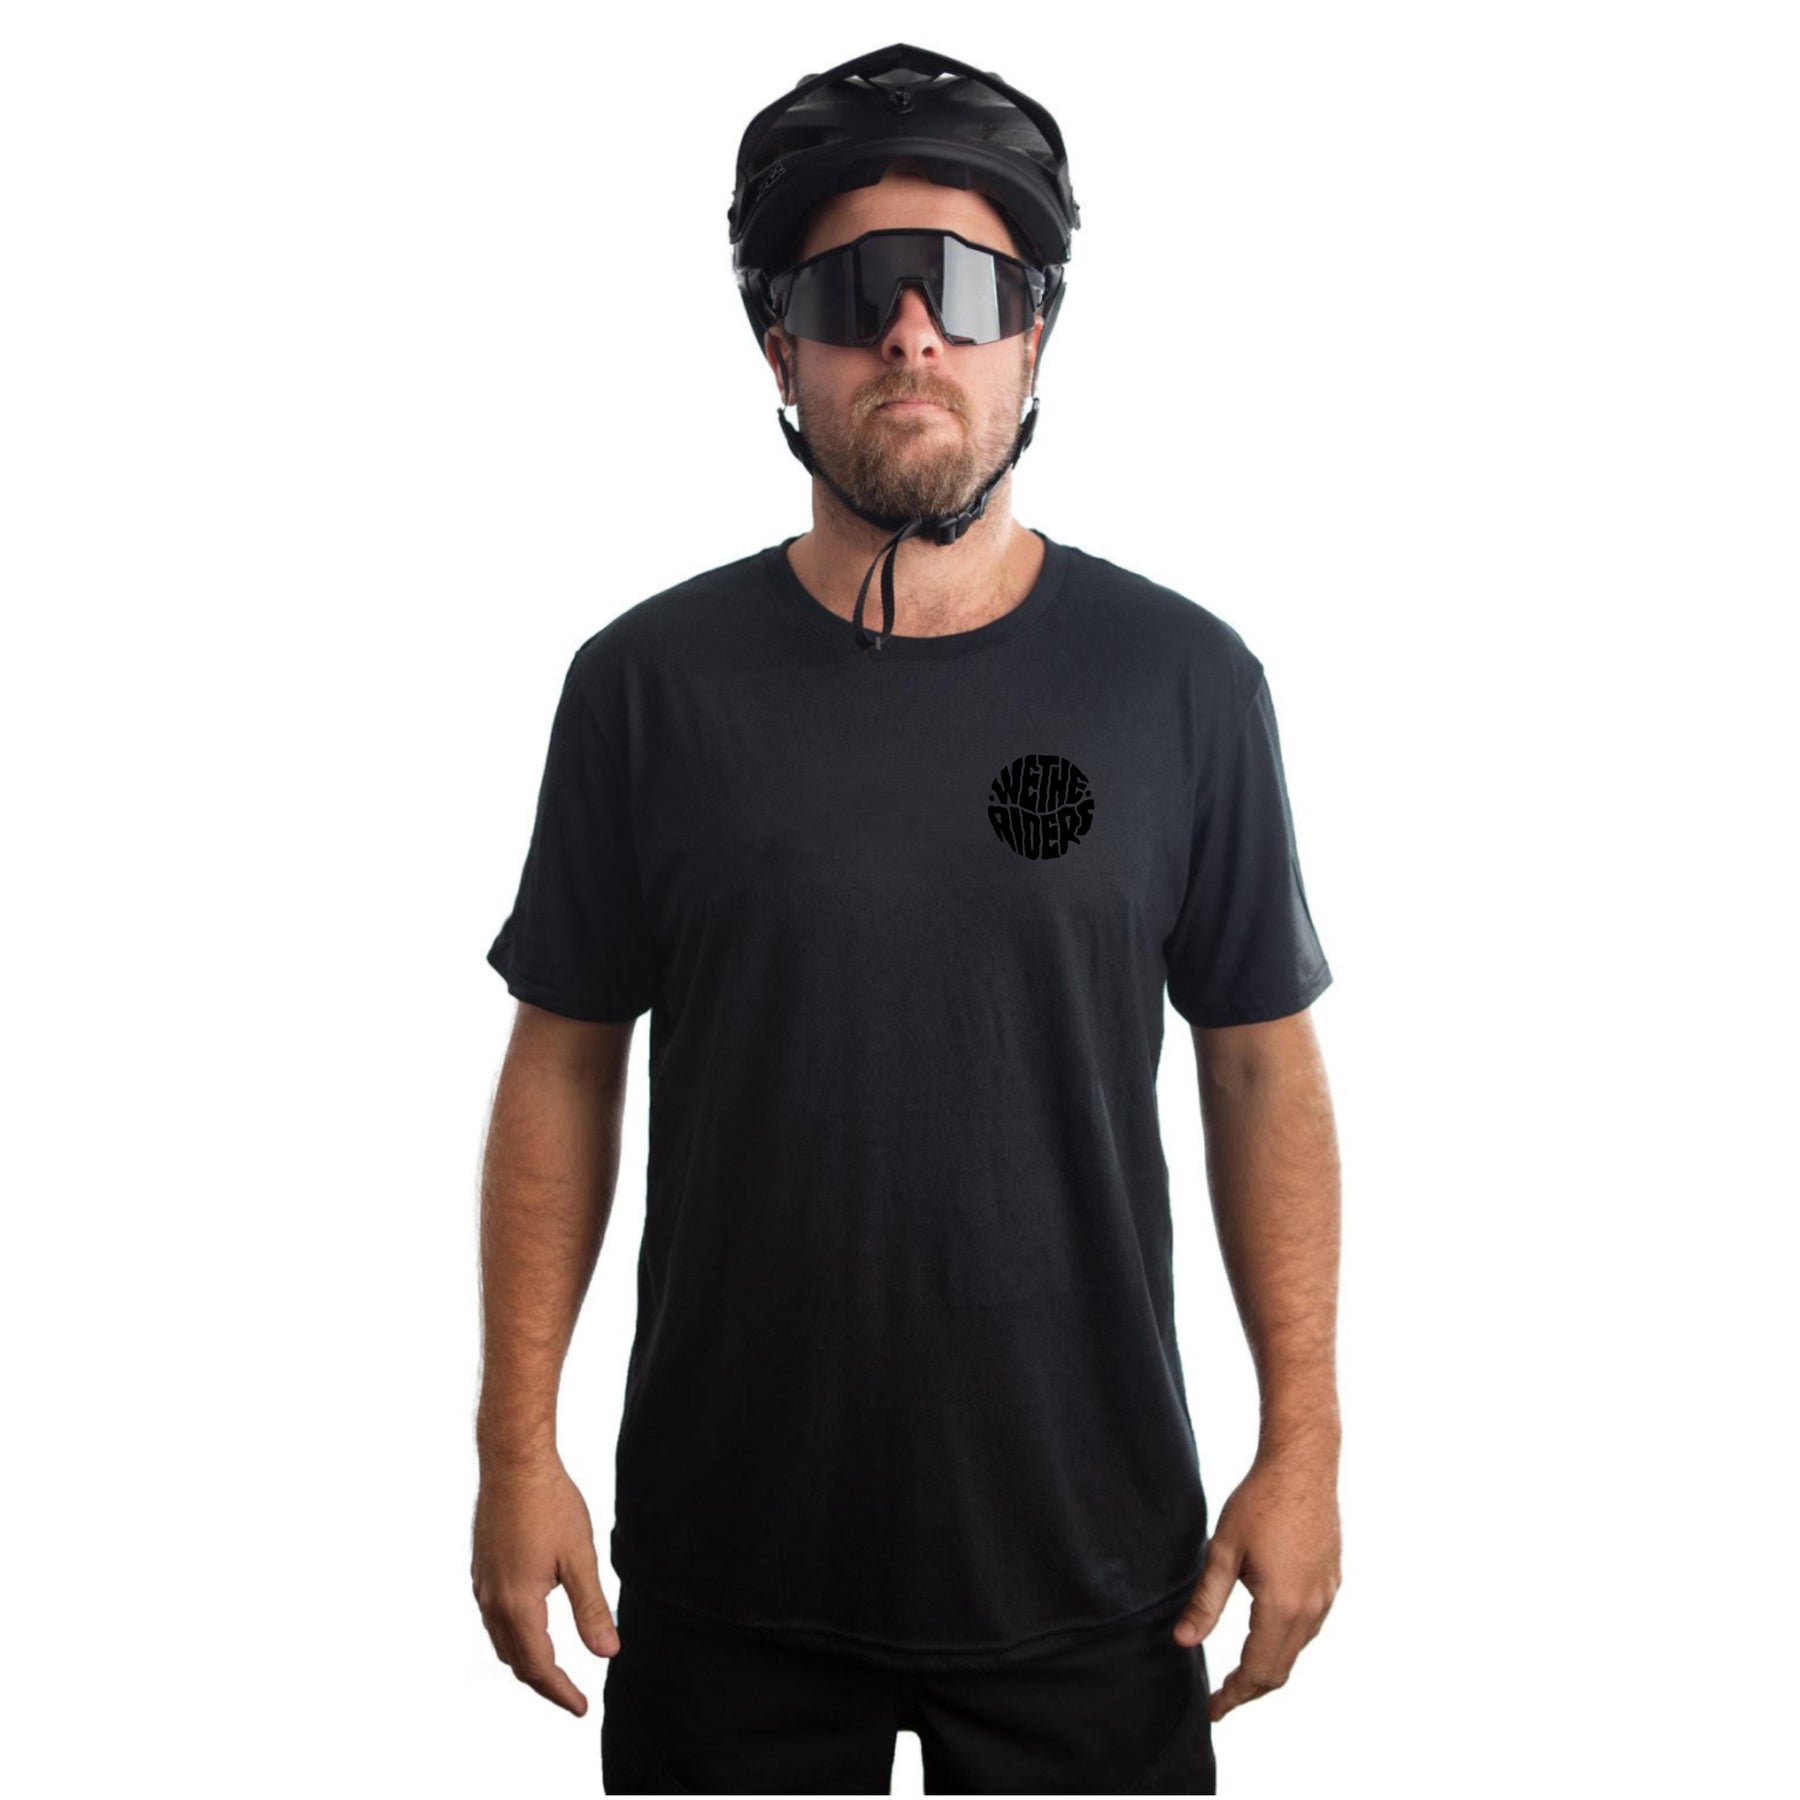 Session - Tech Ride Tee